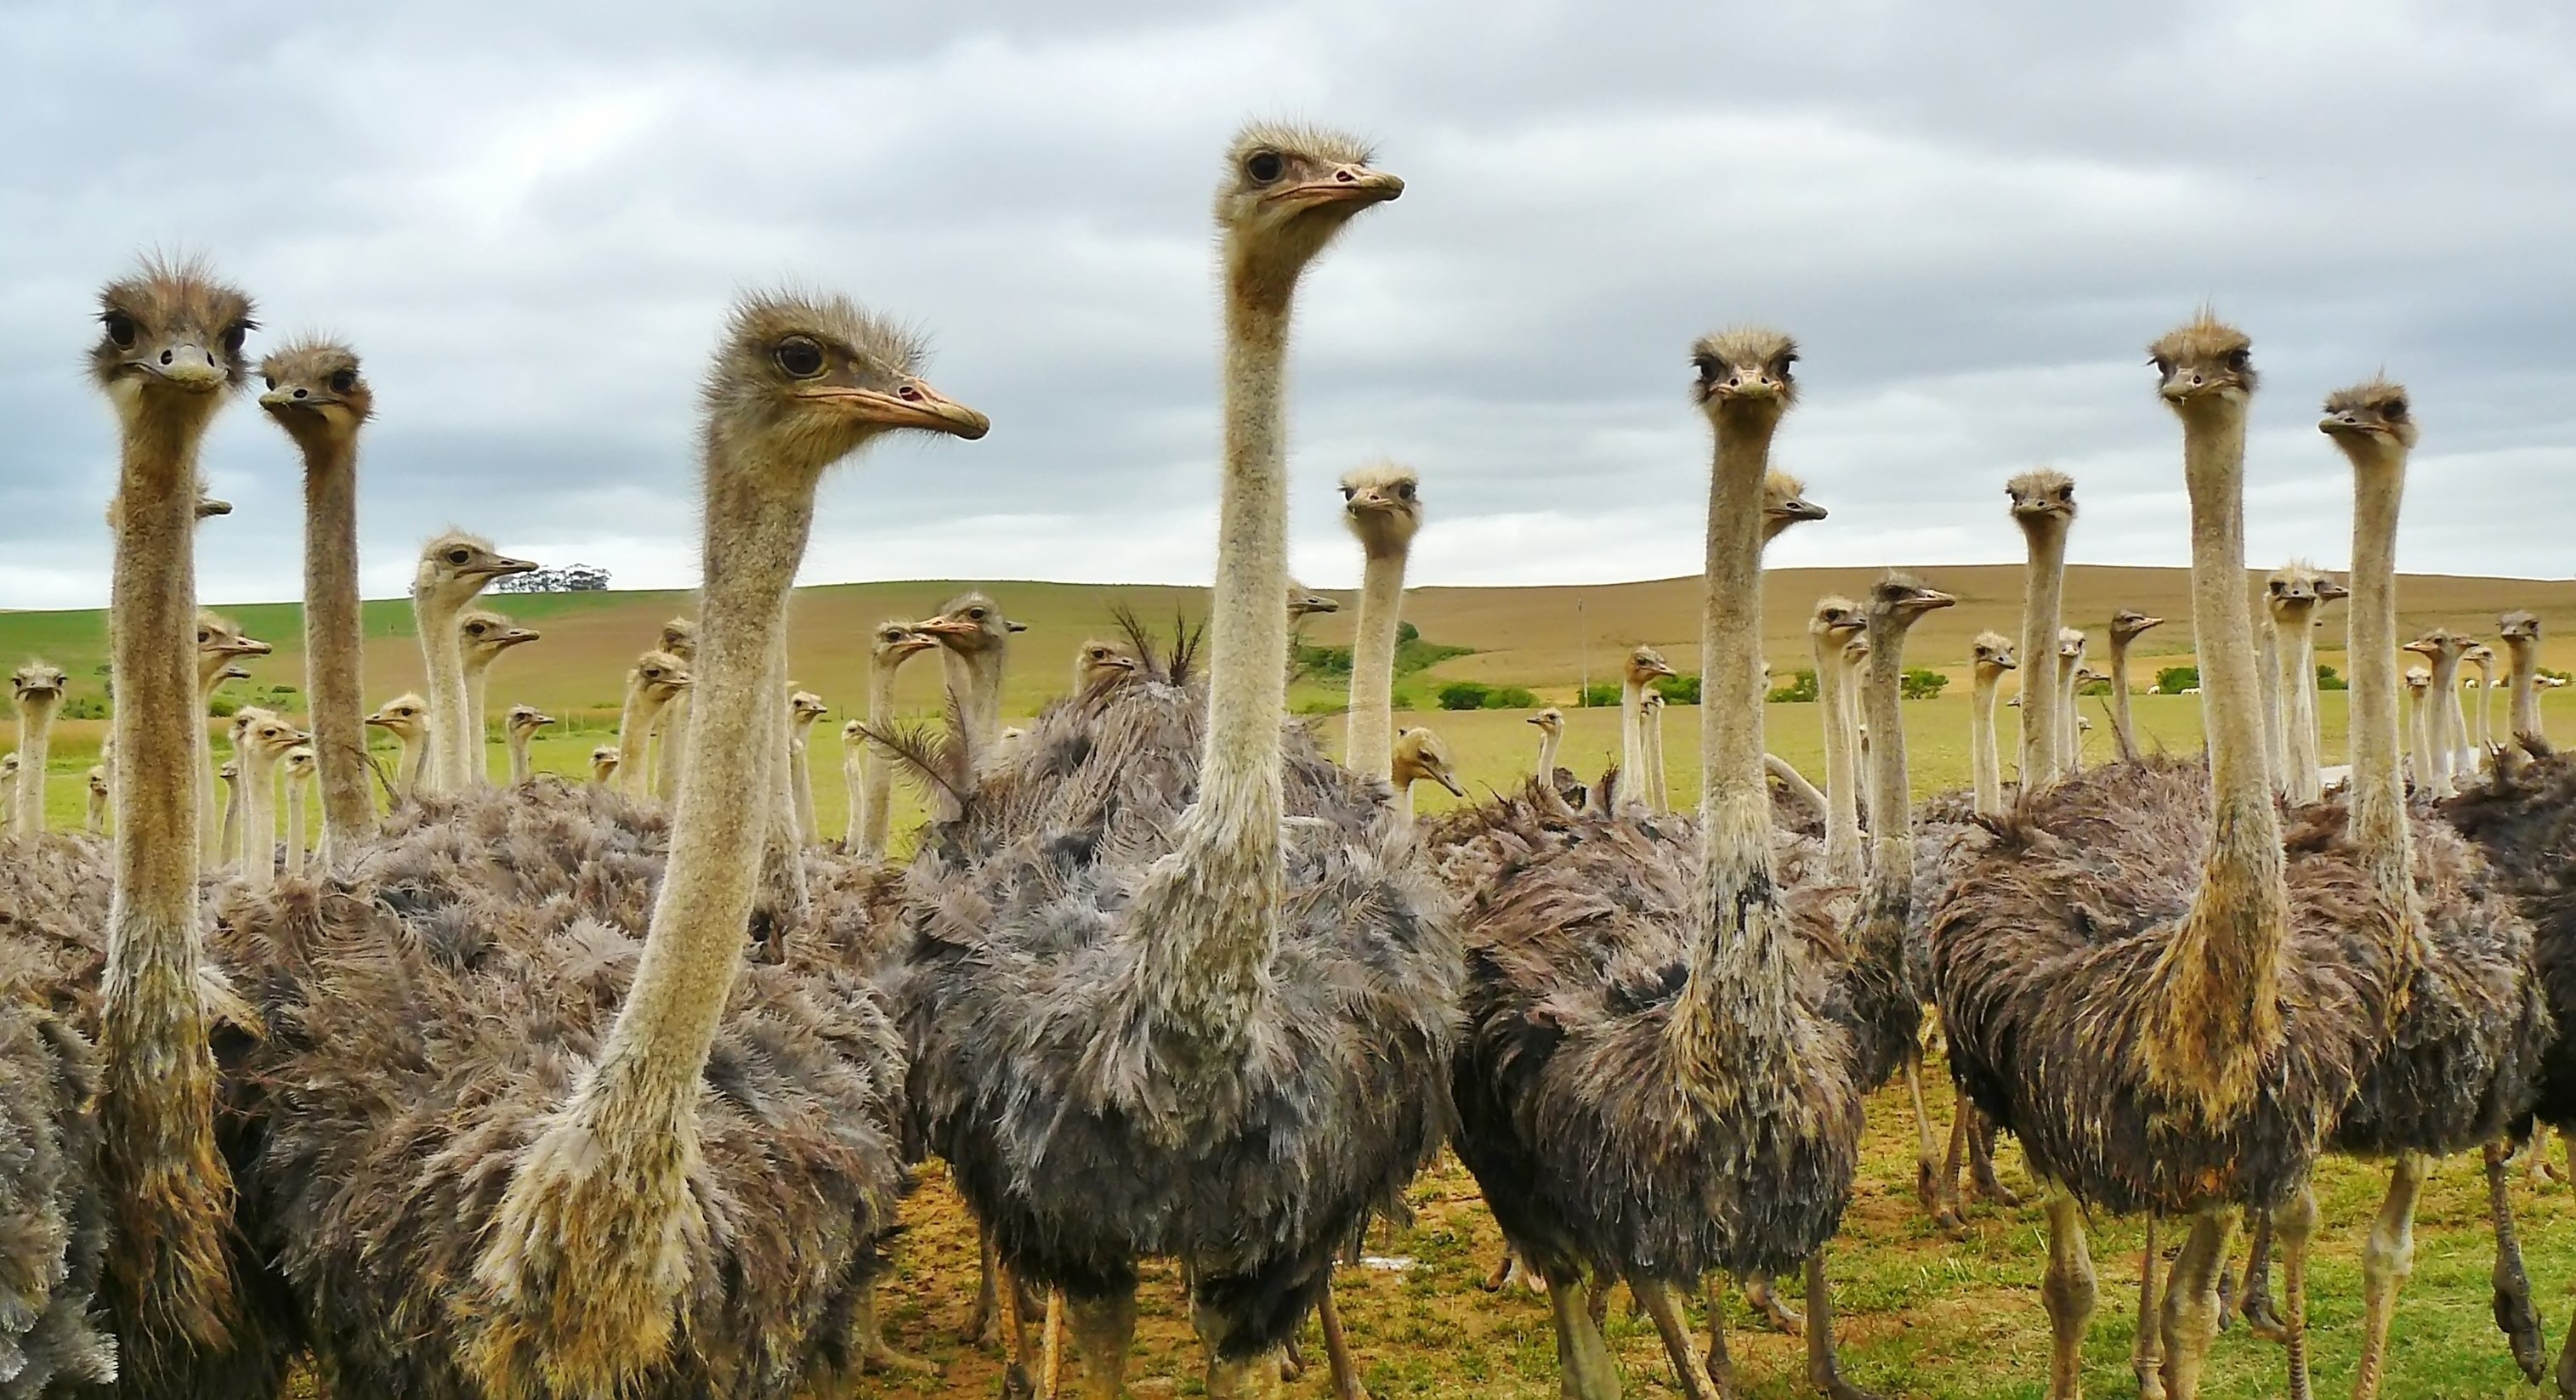 Best ostrich photos, Free stock images, High-quality pictures, Photography collection, 3030x1650 HD Desktop